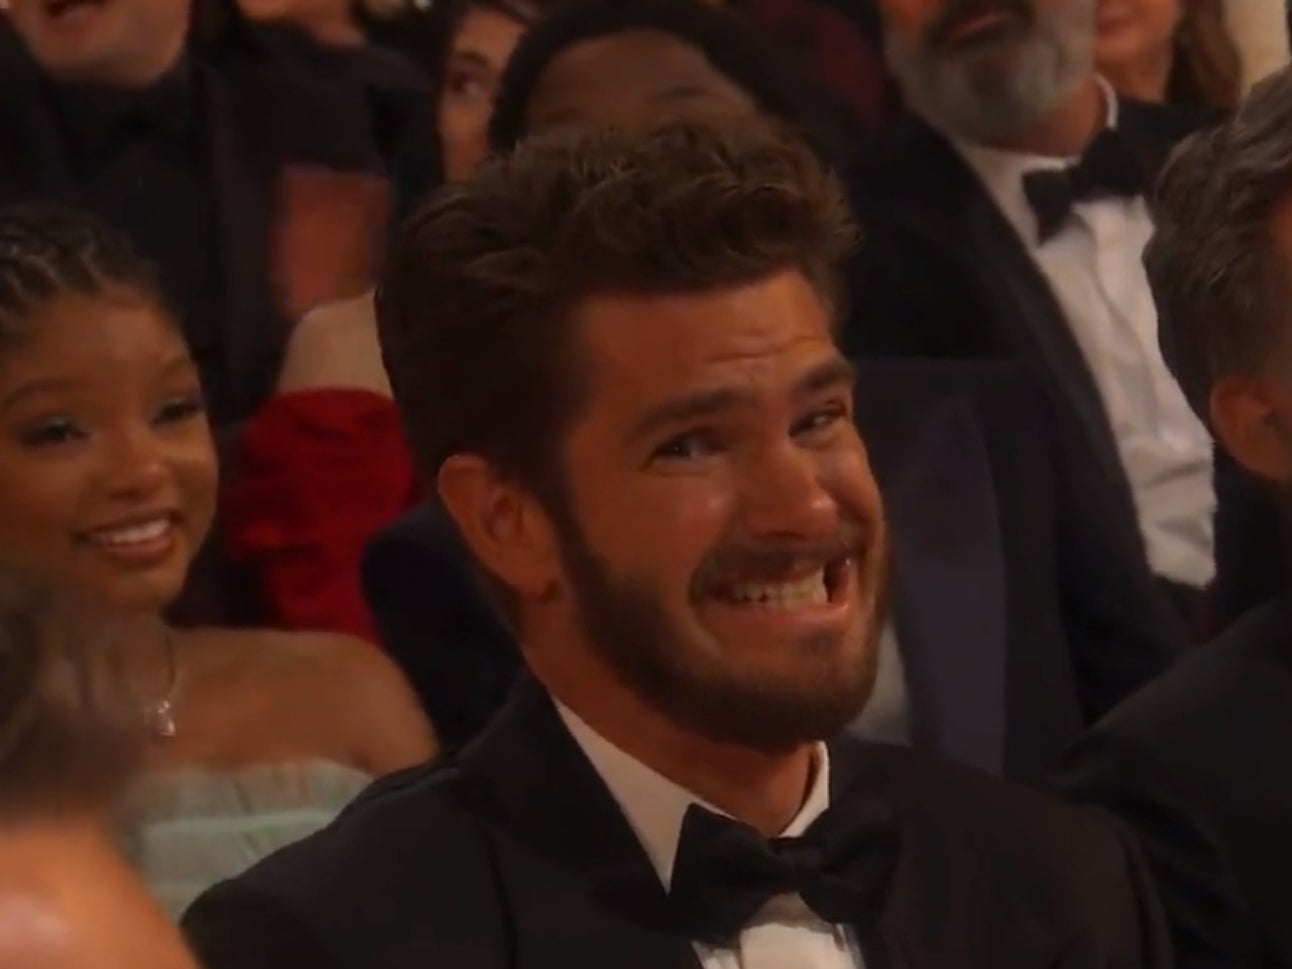 Andrew Garfield at the Oscars